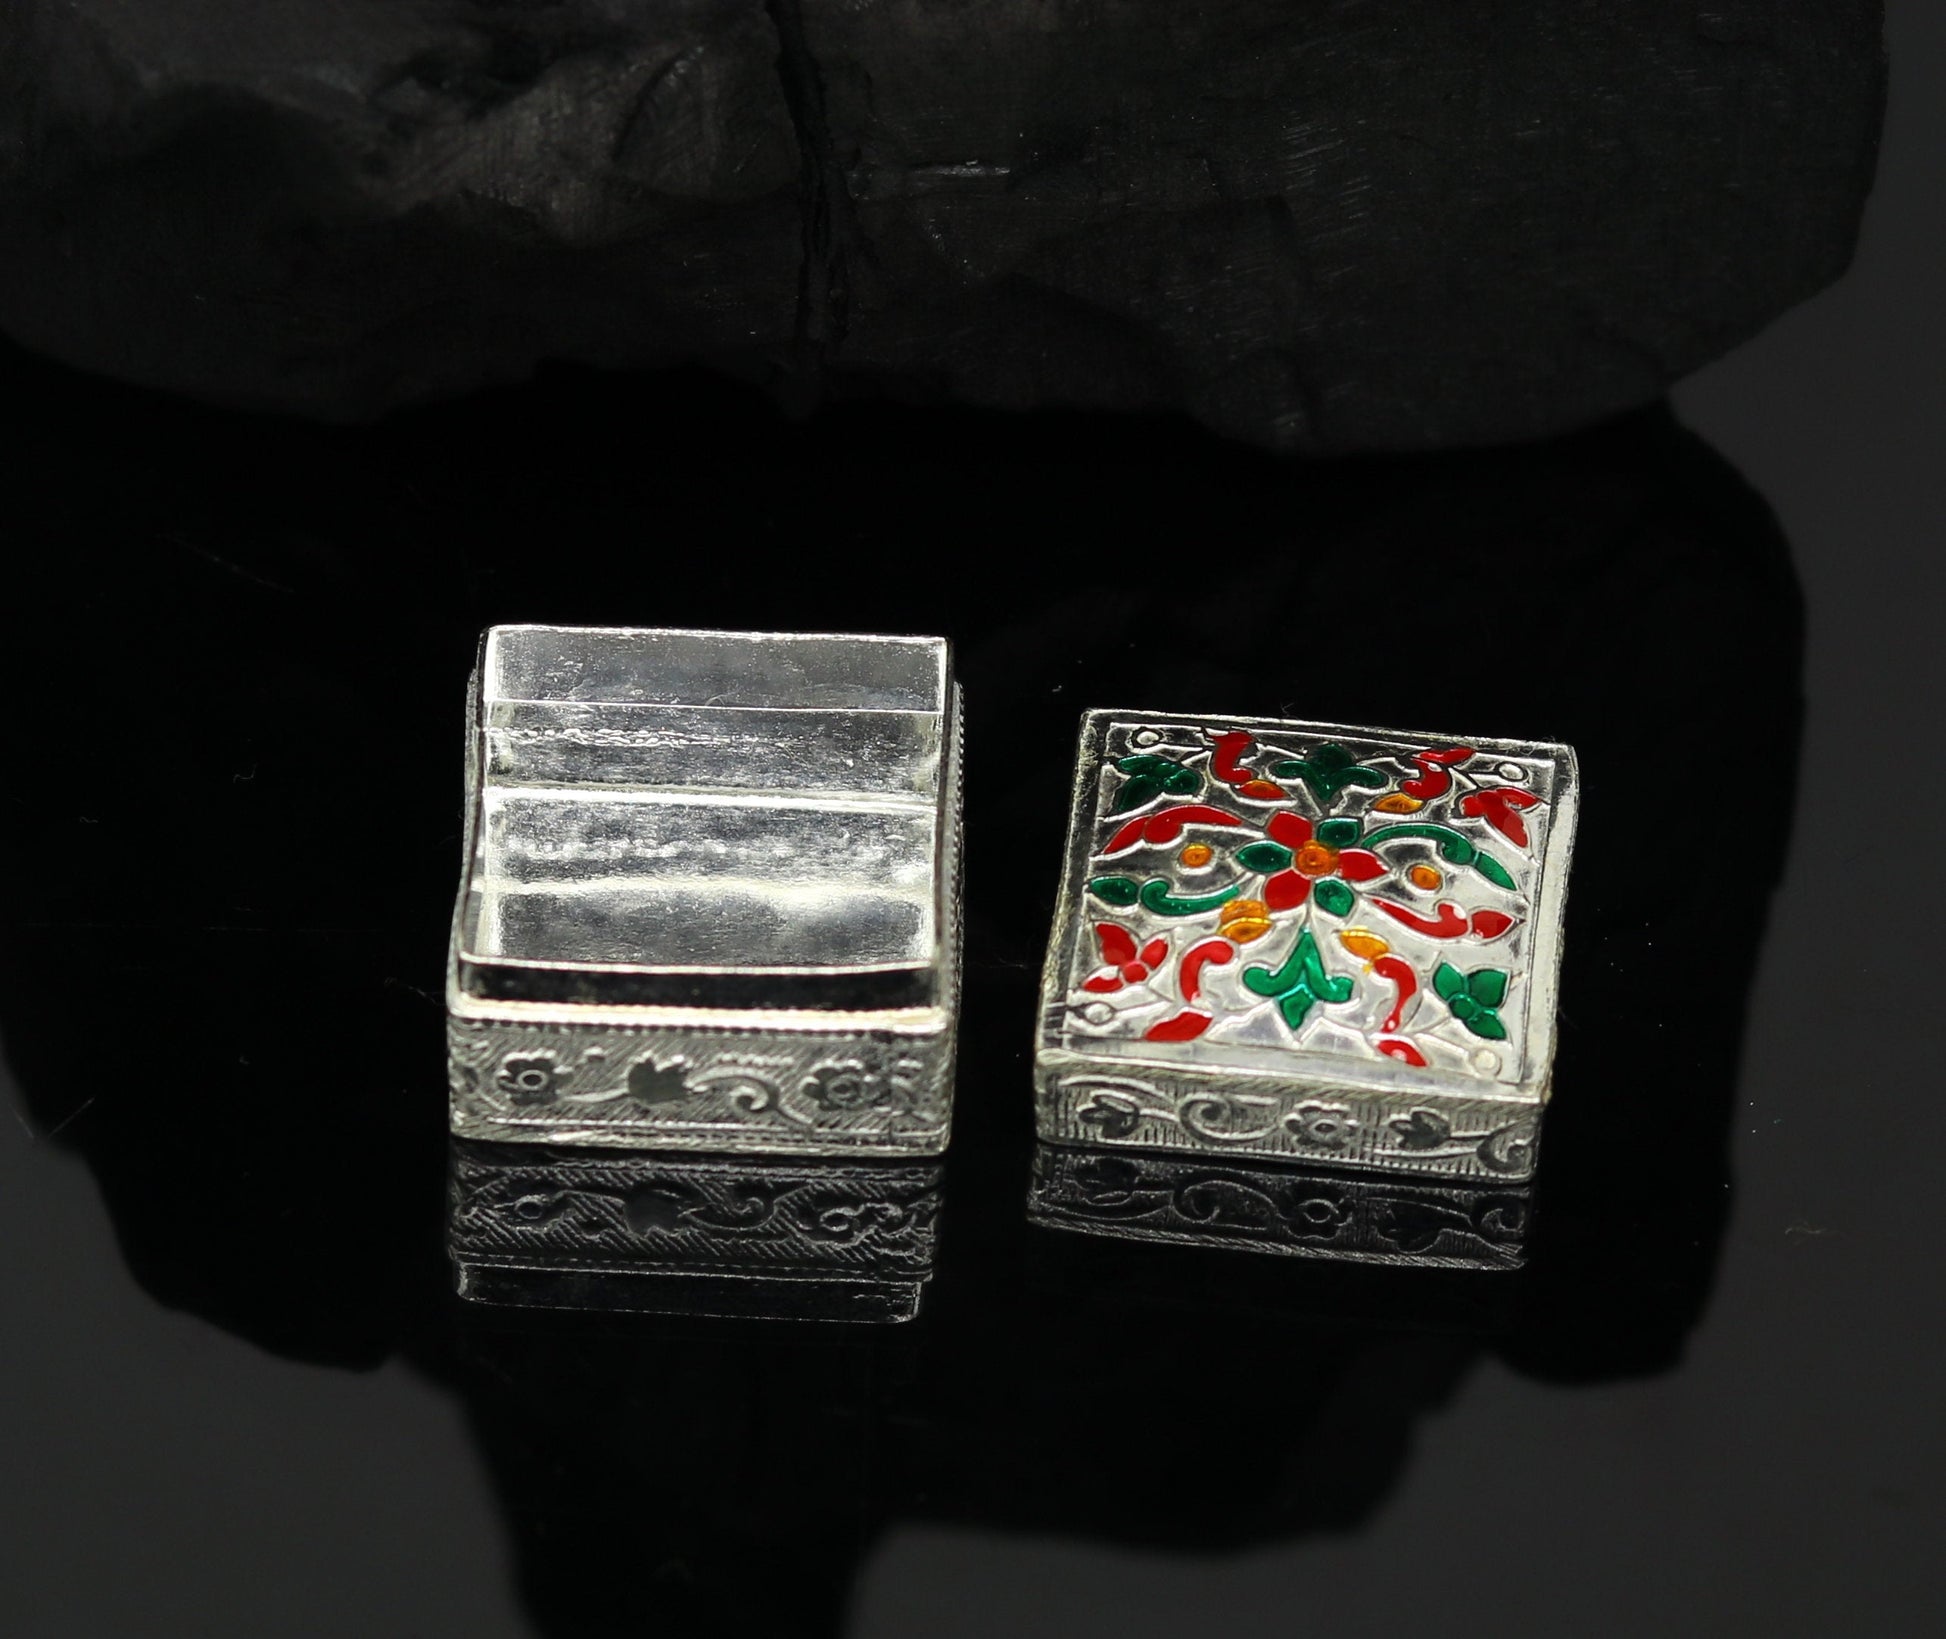 Enamel floral work square shape 925 solid silver utensils trinket box, casket box, container box, jewelry box, silver utensils, vessel stb50 - TRIBAL ORNAMENTS